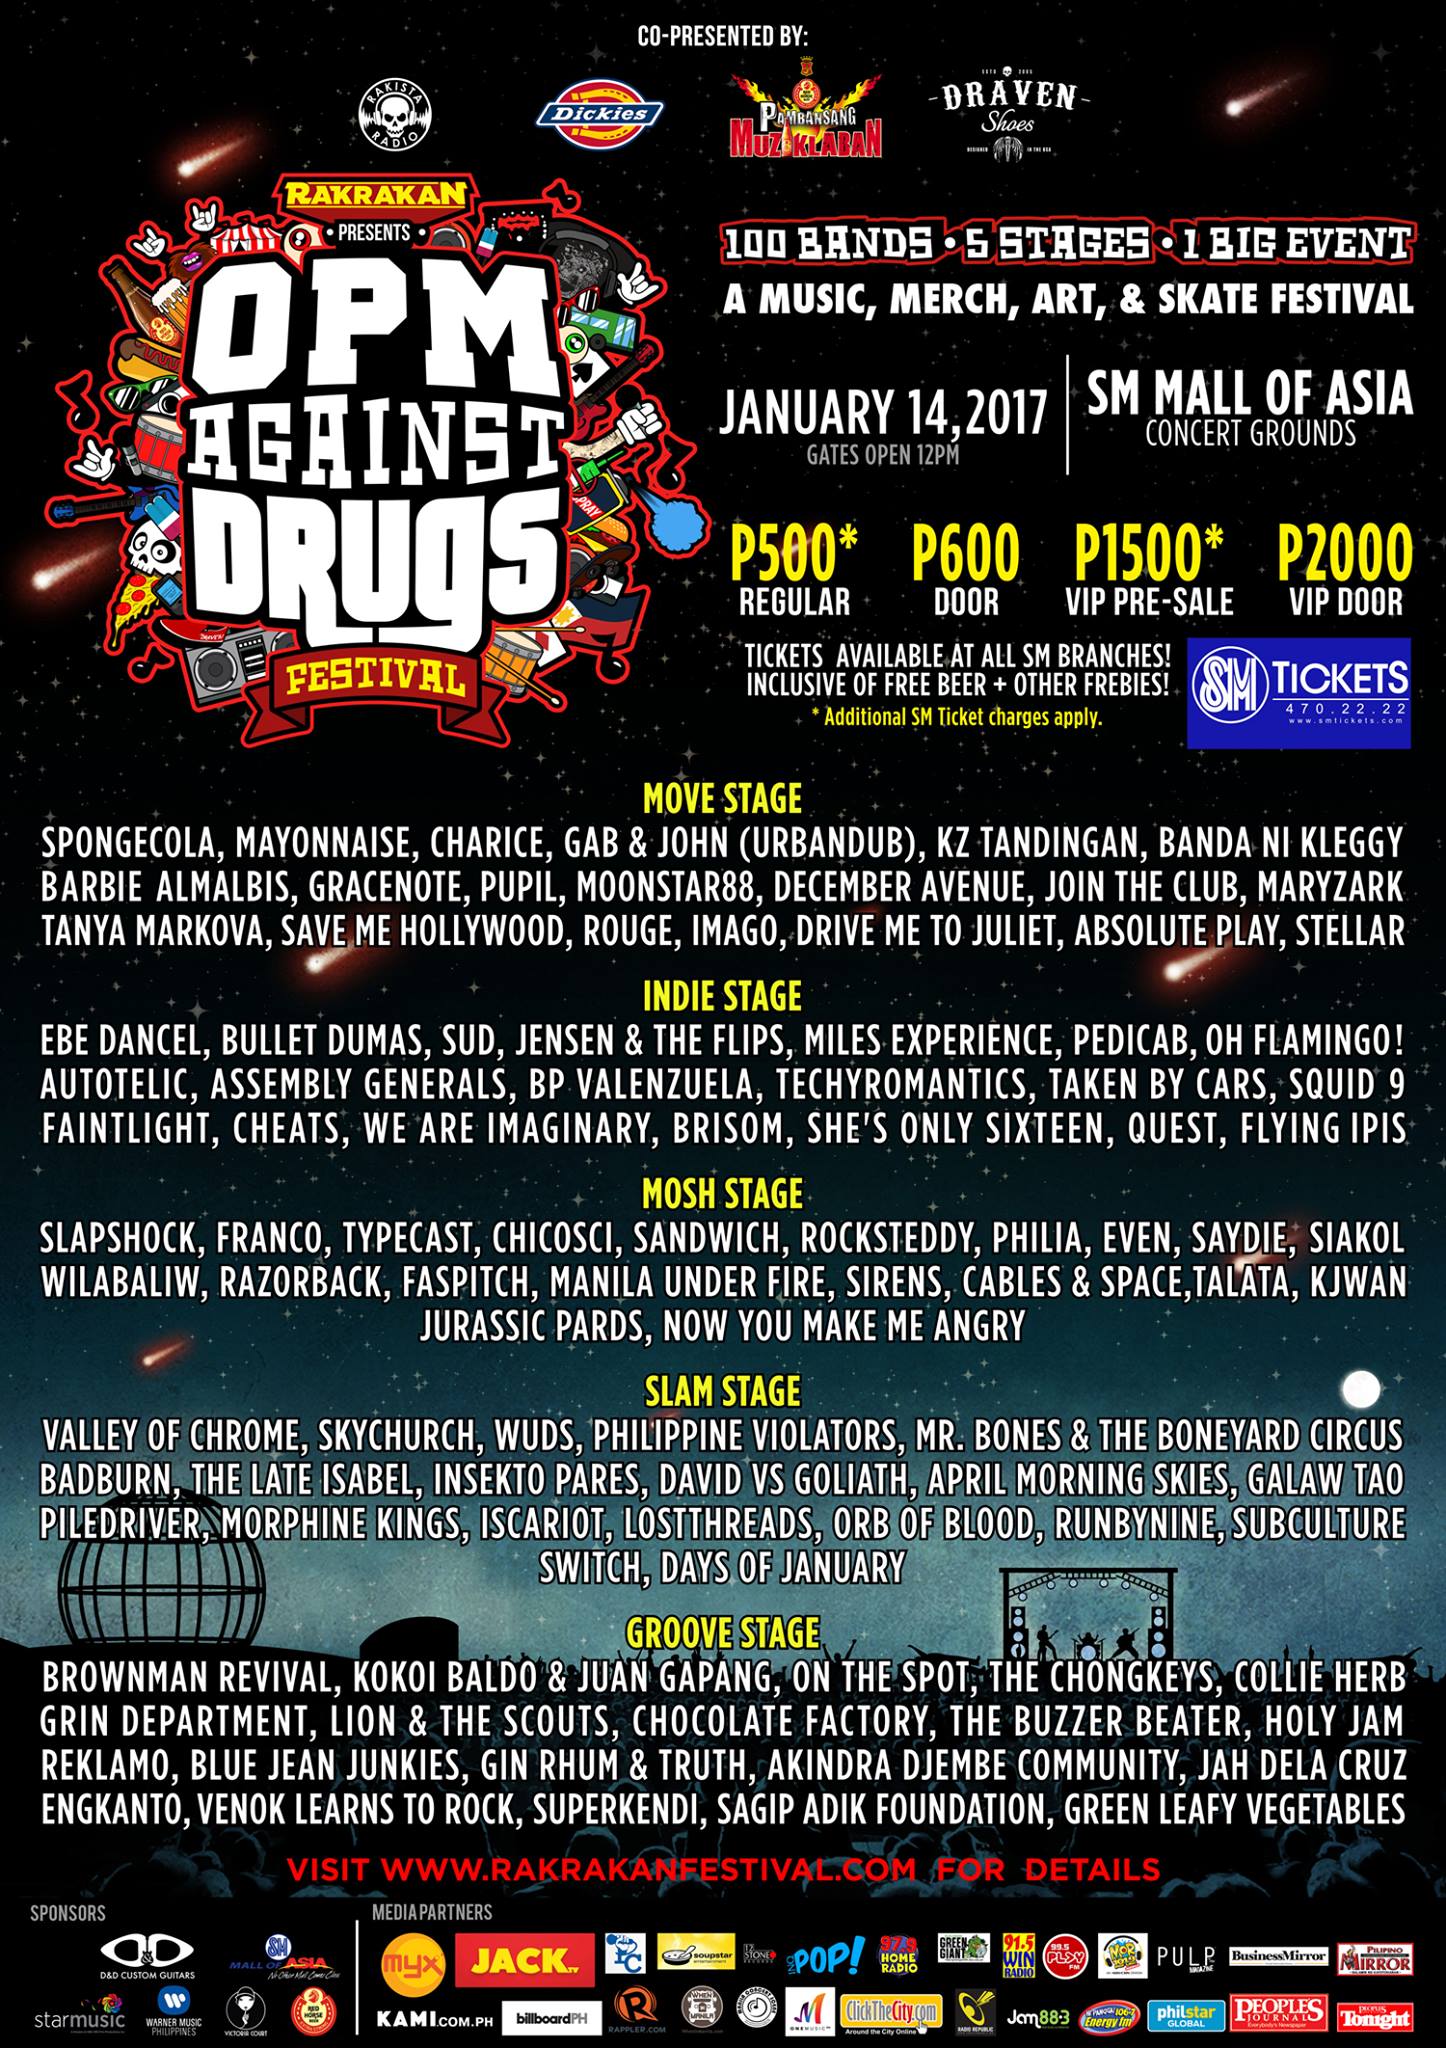 VLTR Page Liked · December 22 · 100 bands / 5 stages / 1big event .. Full line-up for Rakrakan Festival.. What stage Are you gonna hang with? Goodmorning PH! ---- Rakrakan Festival Page Liked · December 21, 2016 · RAKRAKAN: OPM AGAINST DRUGS FESTIVAL. WANT TO WIN VIP Tickets + Official Event Shirt + Freebies? We’re giving away VIP TO 4 LUCKY WINNERS! Just share this photo to your wall, tag at least 5 of your friends that you want to bring at the event, and hashtag #OPMAgainstDrugs #RakrakanFestival. Don’t forget to public your post so we can see it. Winners will be randomly picked and announced on January 10 at 7pm. Tickets are available at all SM TICKETS outlets located in SM CINEMAS nationwide. REGULAR P500 / REGULAR Barkada Promo Buy 4 + Get 1 Free / REGULAR Door Price P600 / VIP Pre-Sale P1500 / VIP Door Price: P2000 (+ Sm Ticket Charges). For ticket inquiries, please call 4702222. For more details visit http://rakrakanfestival.com/ RSVP: Rakrakan Festival : OPM Against Drugs